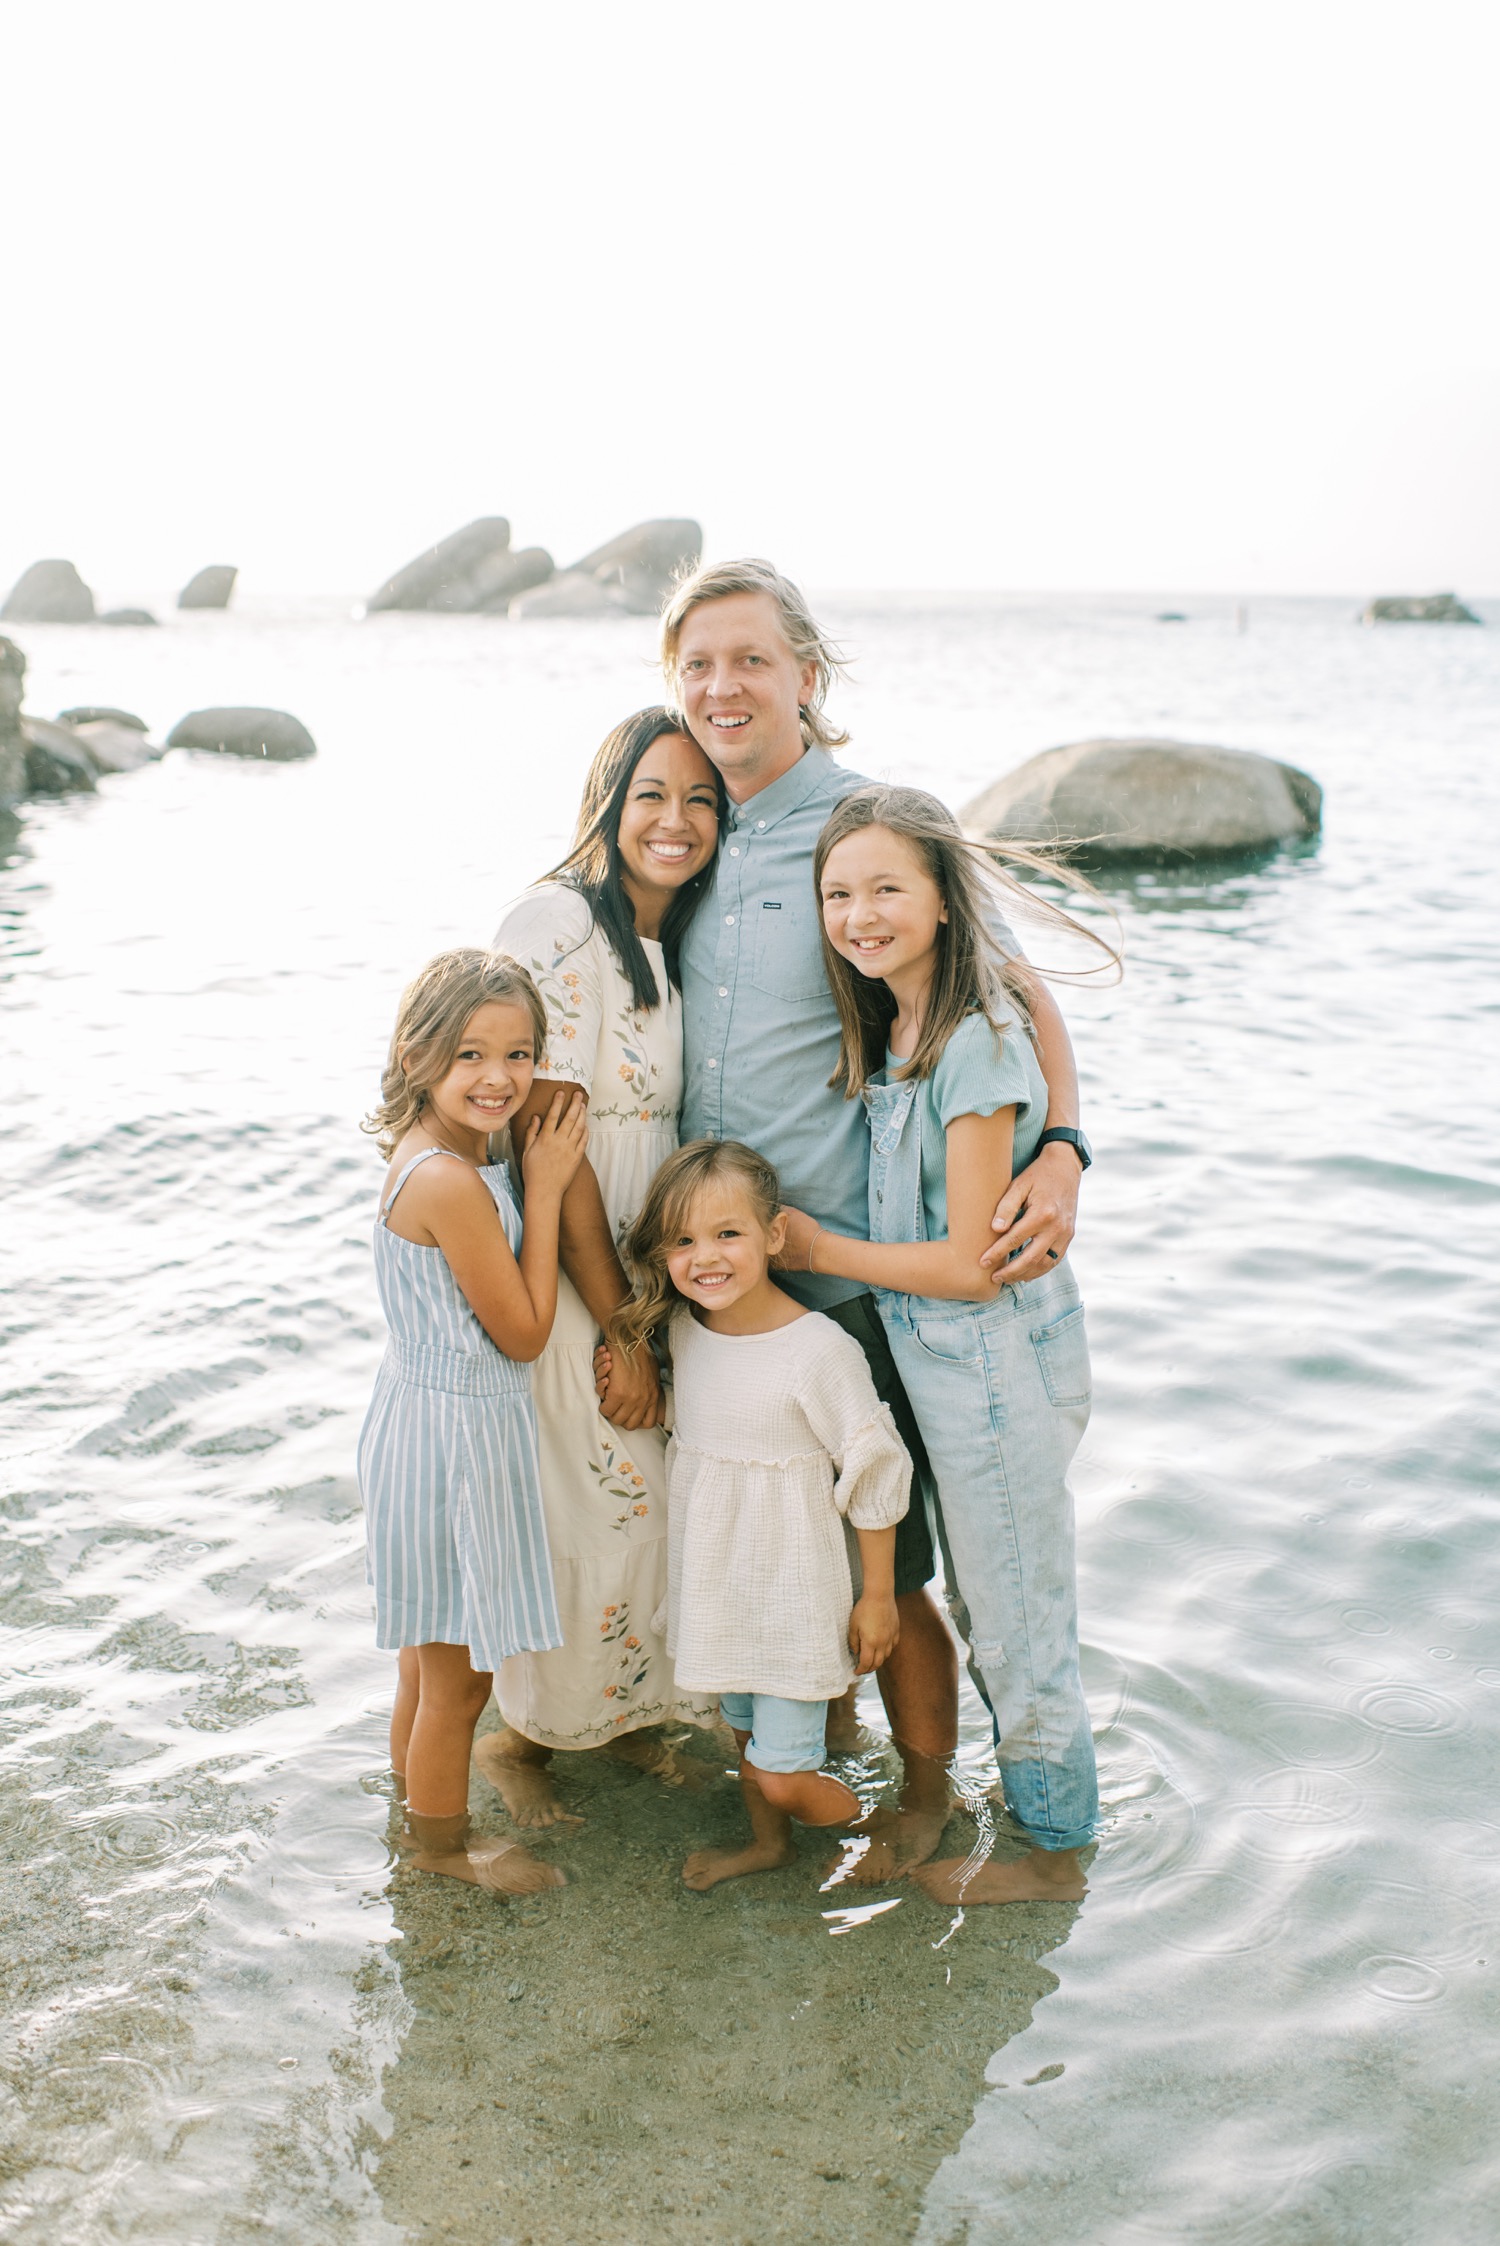 Free Photos - A Joyful Moment As A Family Of Four Poses Together For A  Picture. The Parents And Their Two Children Are Standing Closely, Creating  A Heartwarming Scene Filled With Love